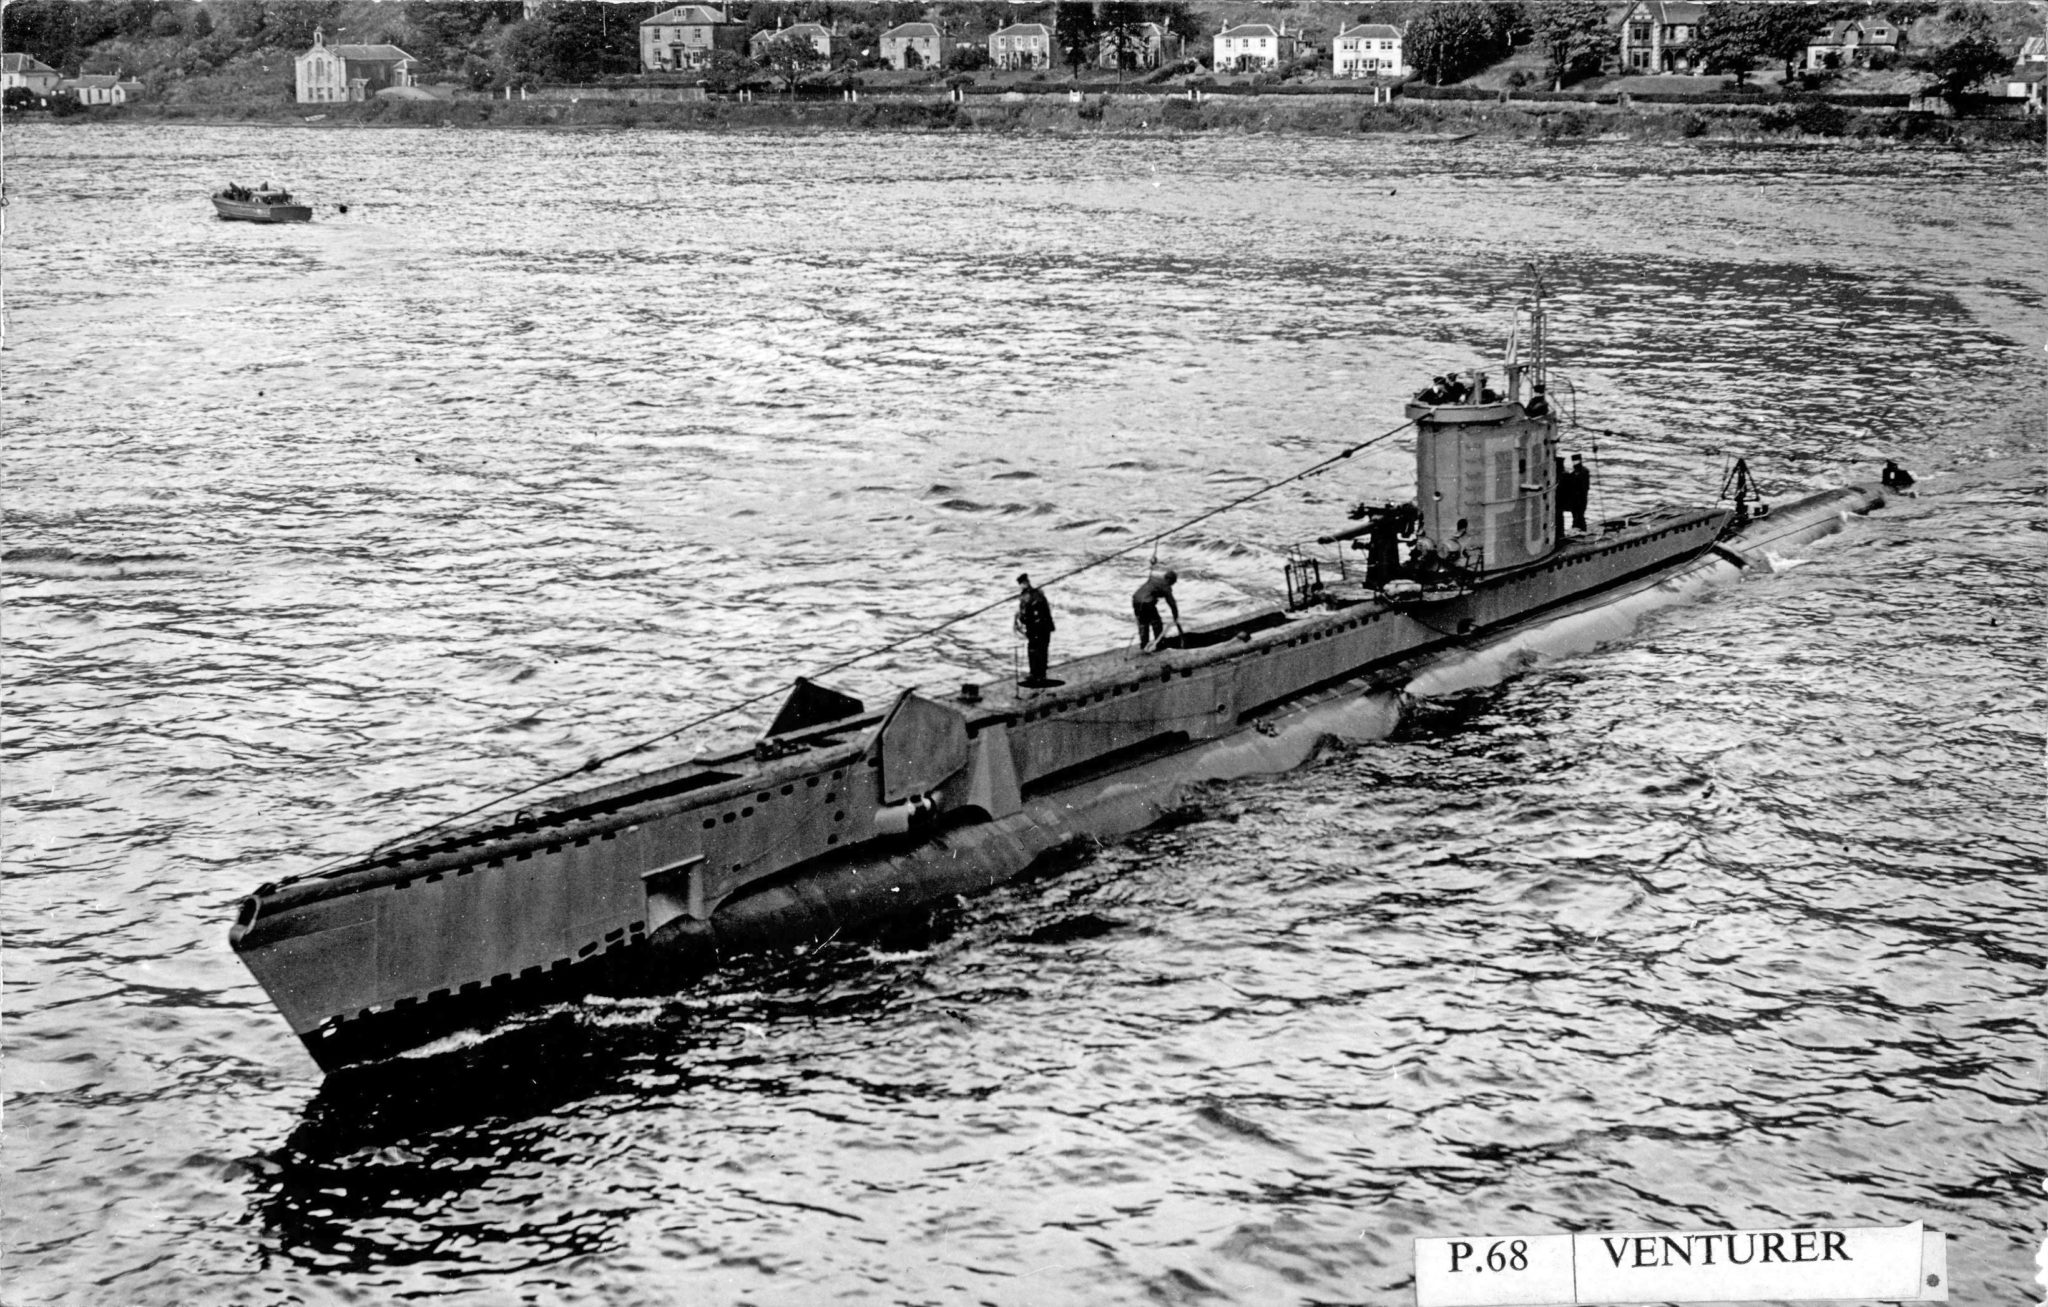 British Royal Navy Submarine HMS Venturer, P68, at sea, date not given. (Photo by Arkivi/Getty Images)